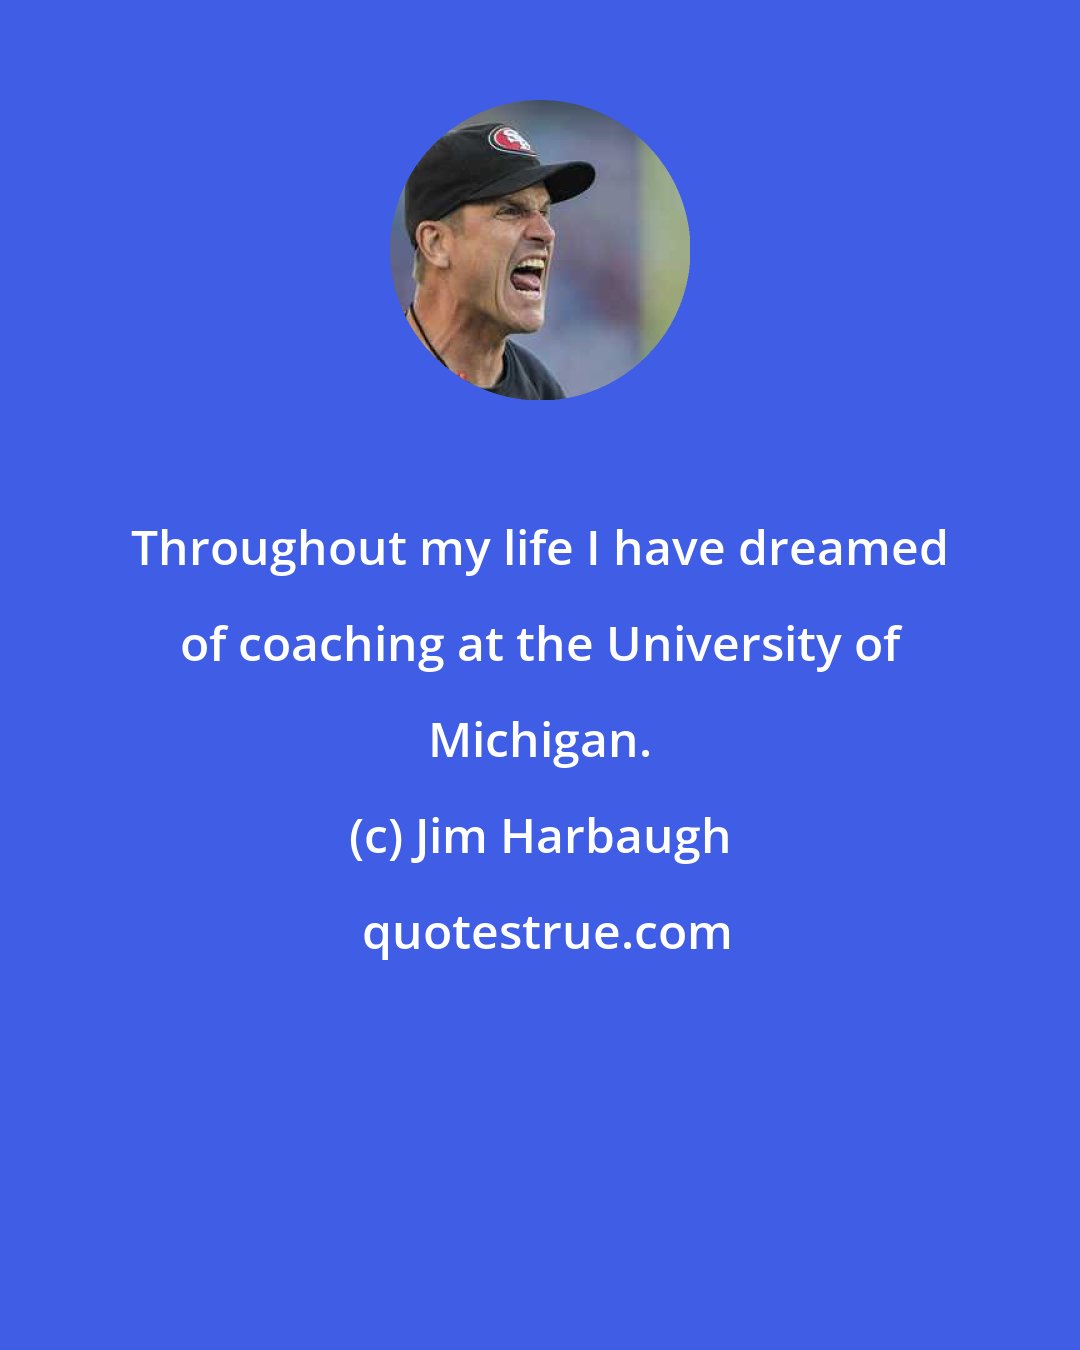 Jim Harbaugh: Throughout my life I have dreamed of coaching at the University of Michigan.